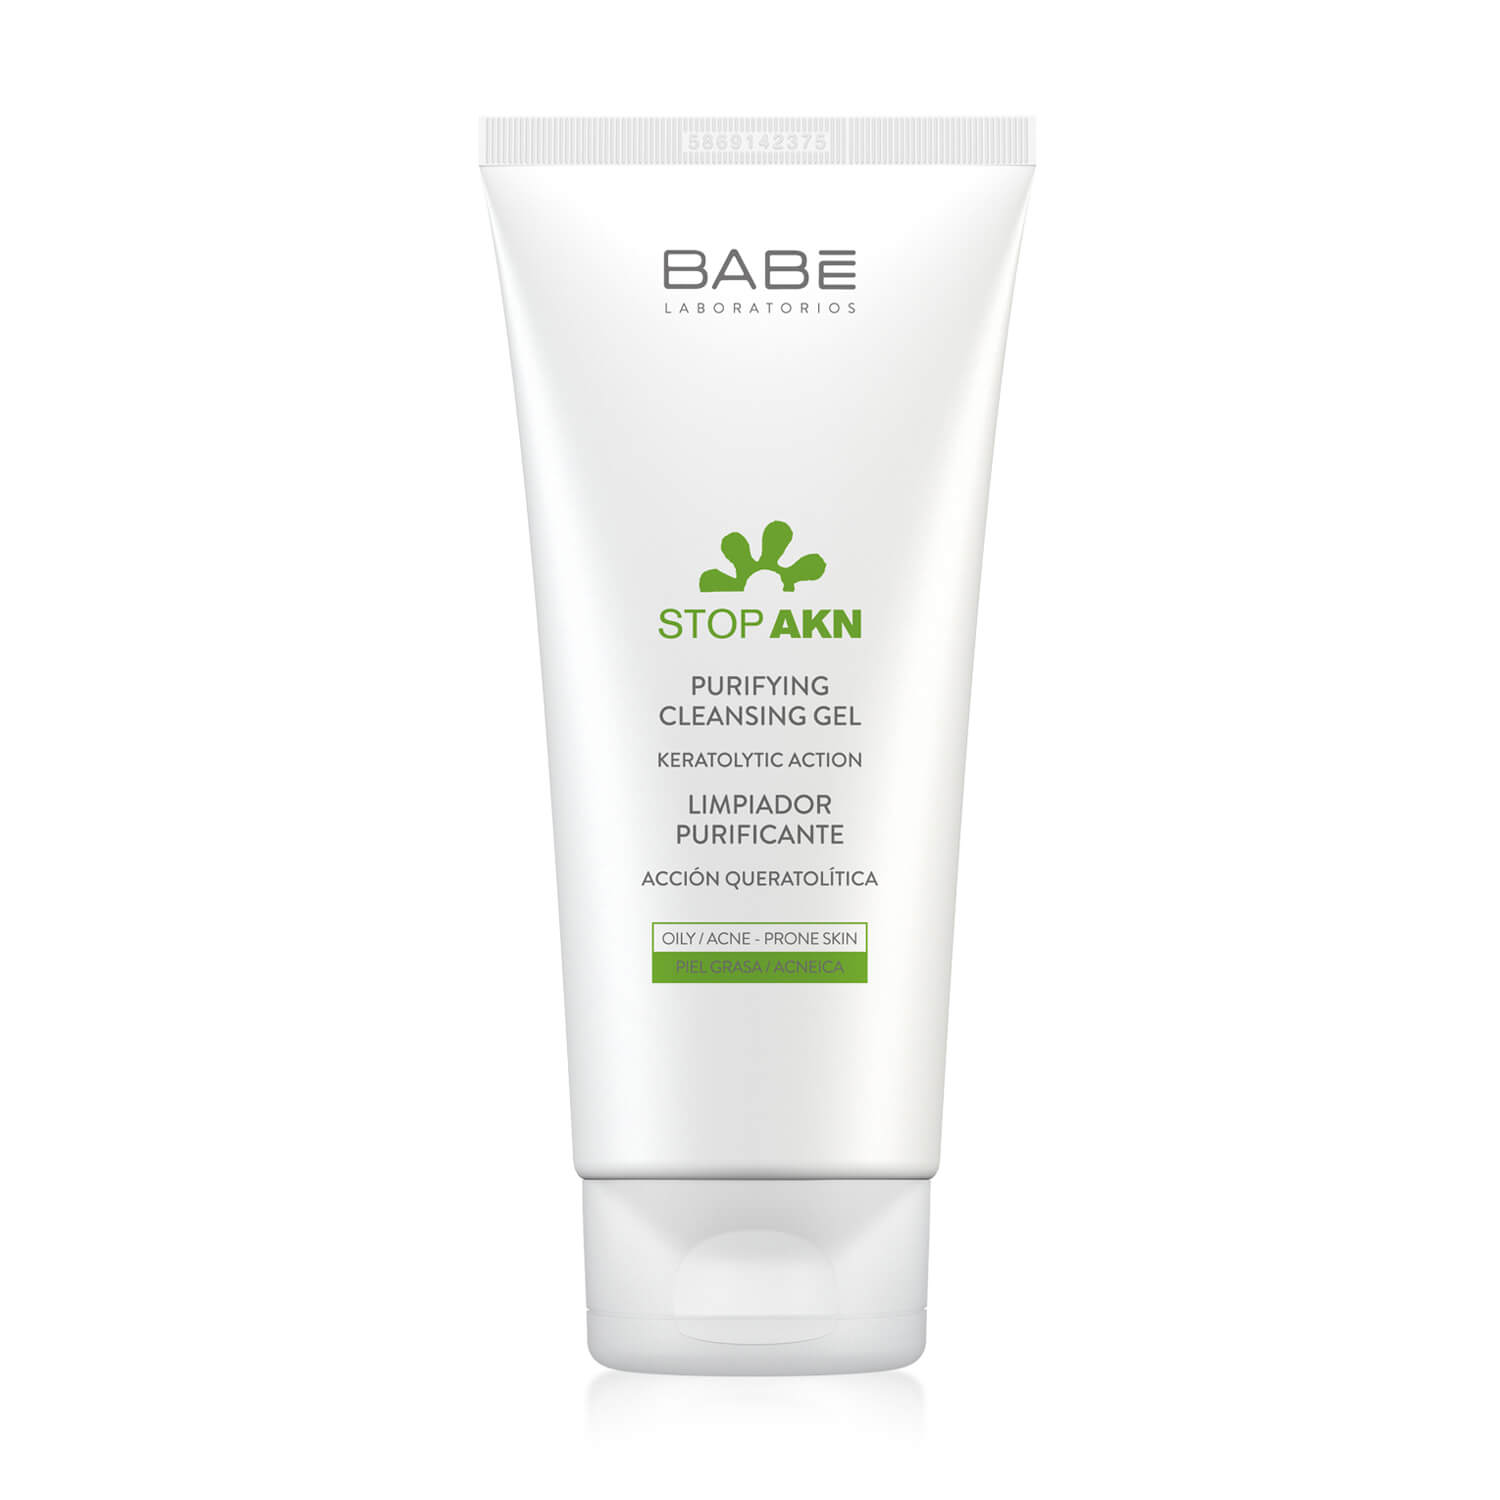 Babe Laboratorios Stop AKN Purifying Cleansing Gel